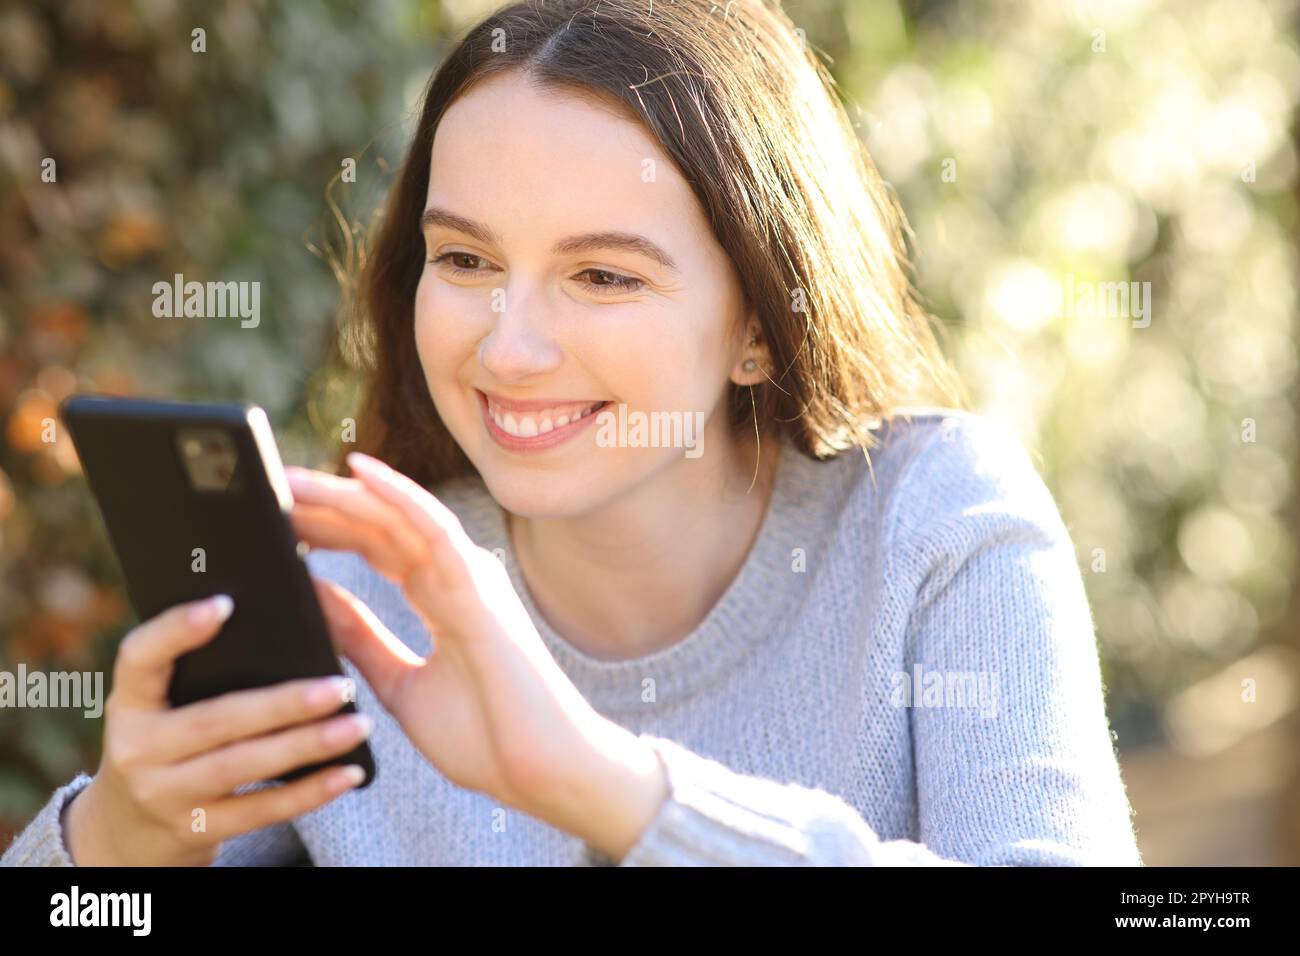 Happy woman using smart phone in a park Stock Photo